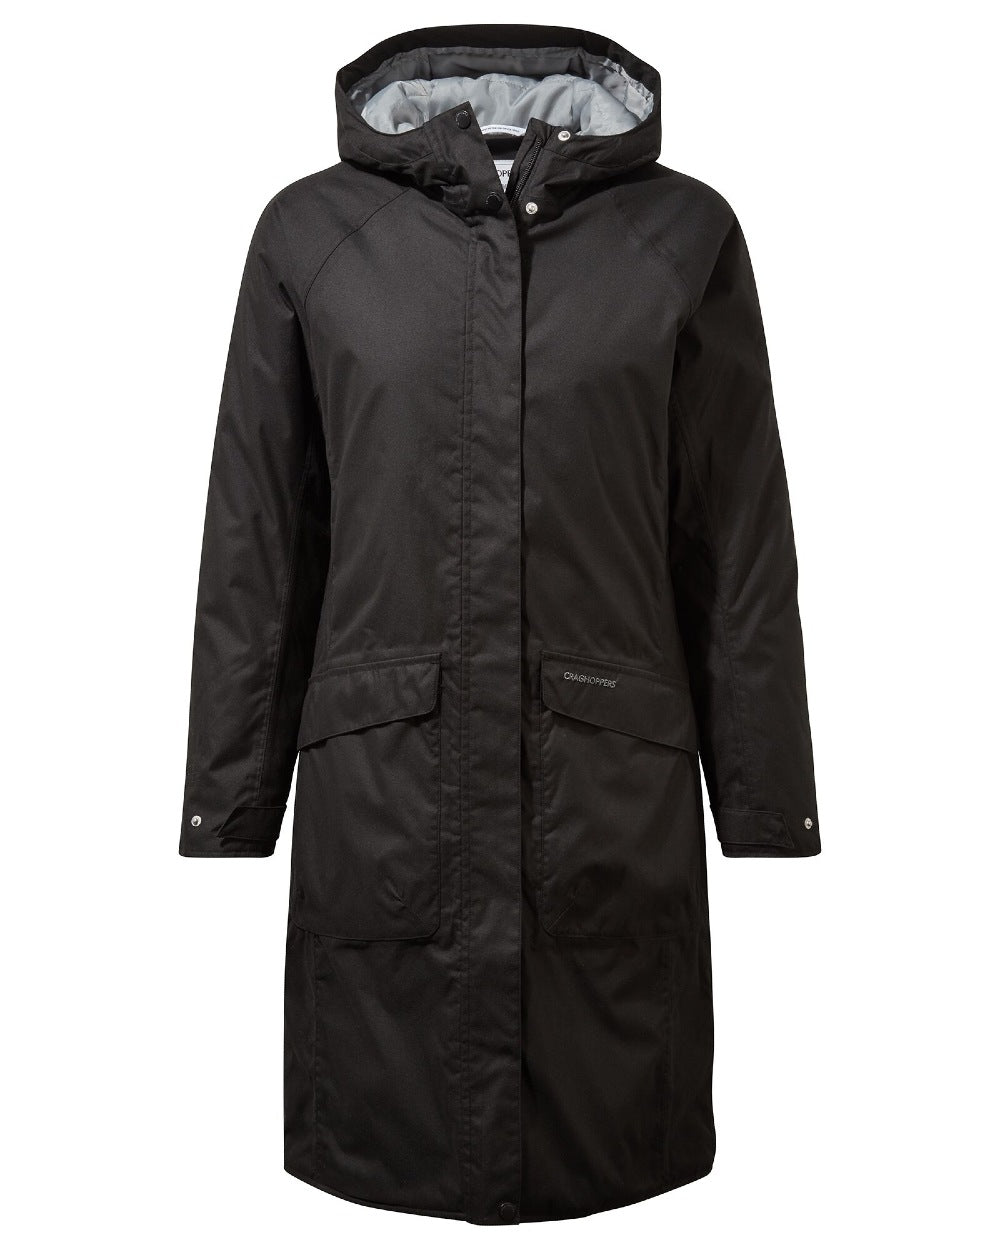 Craghoppers Caithness Long Waterproof Jacket in Black 